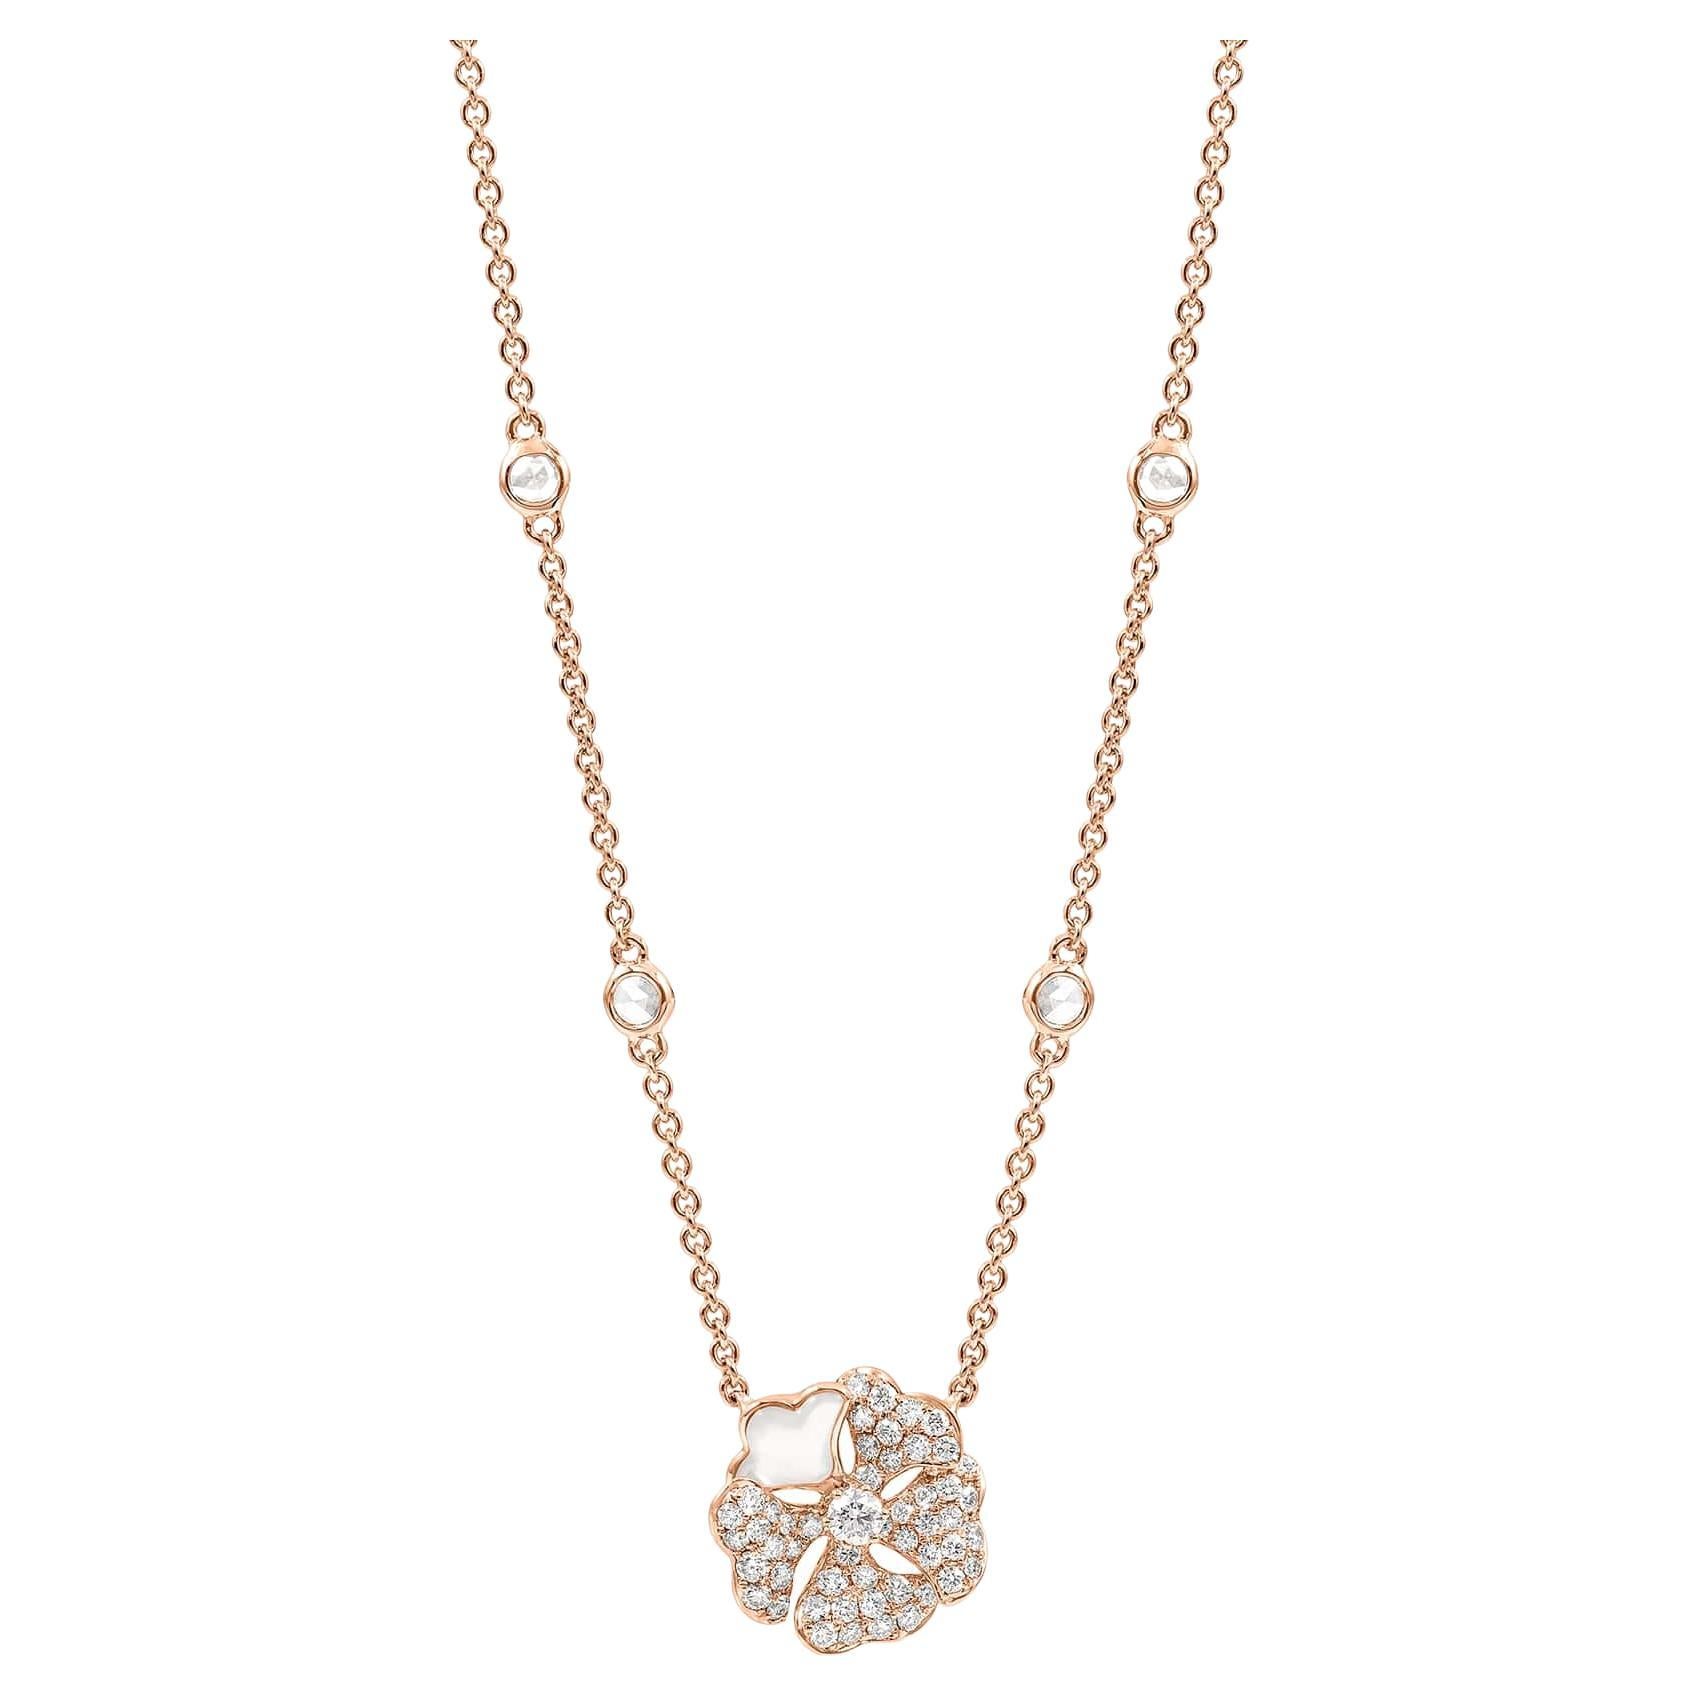 18ct Rose Gold 4 Inch Extension Chain